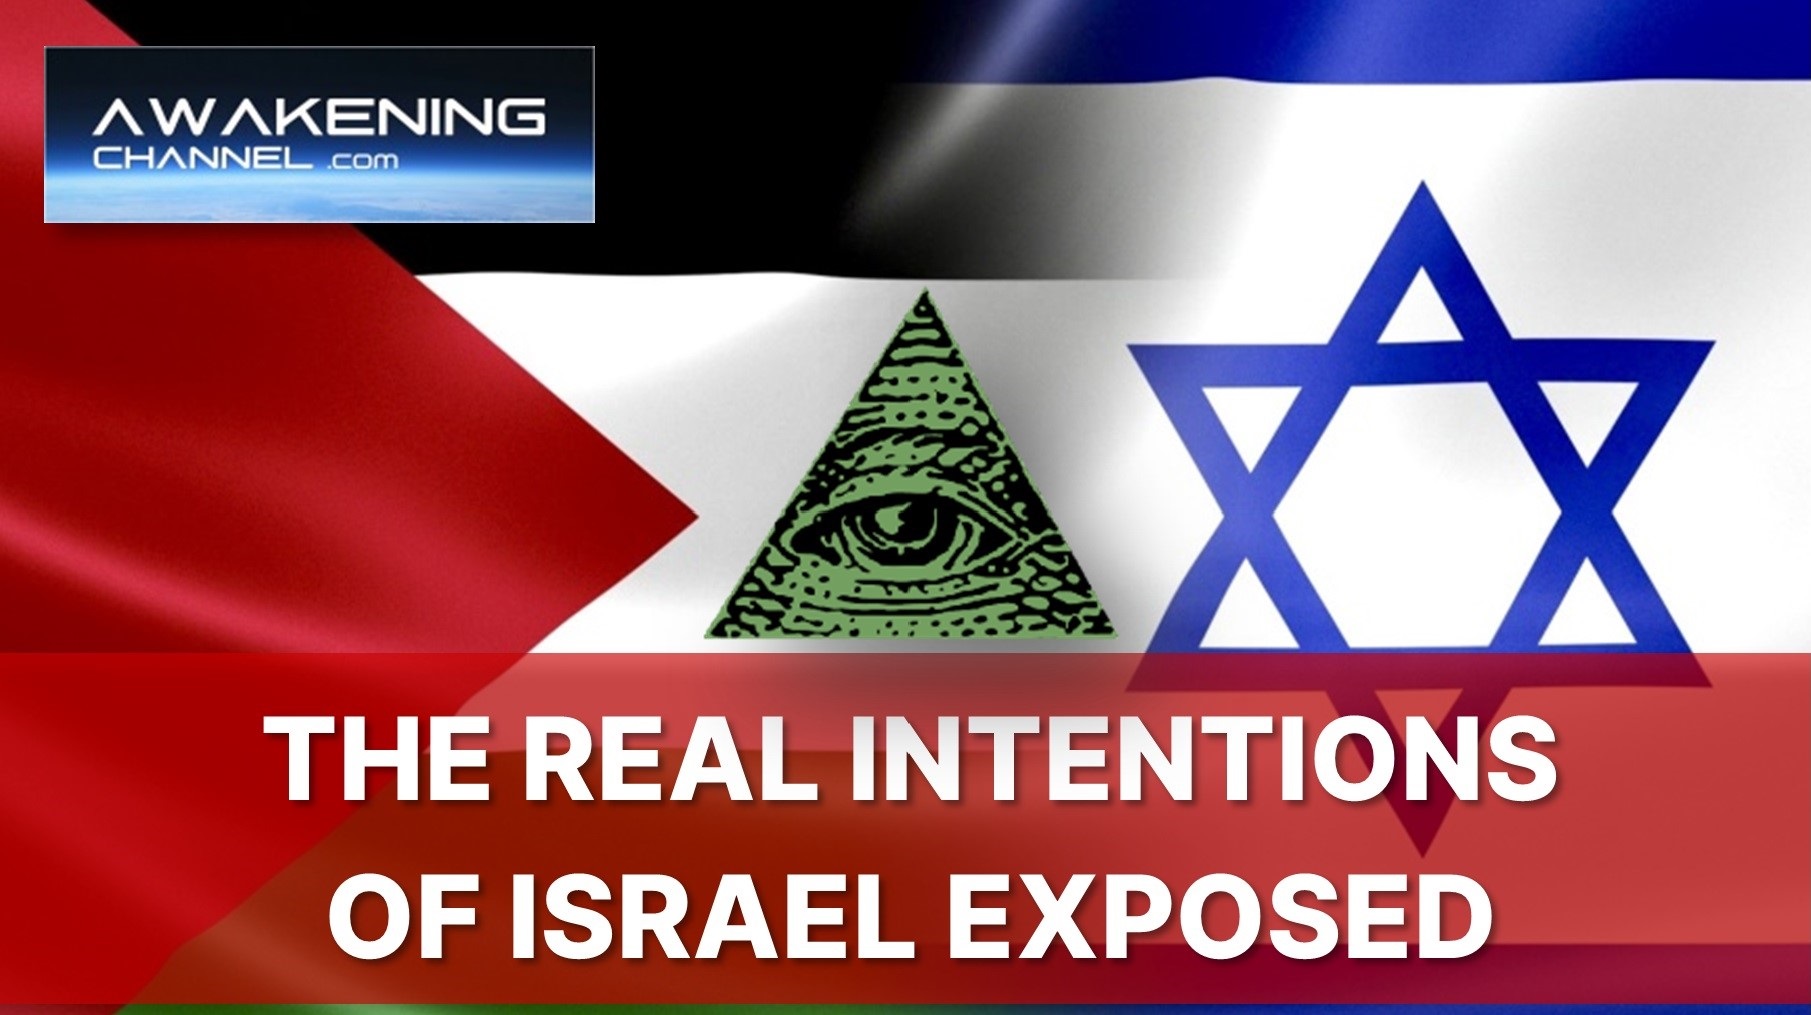 Palestine´s Takeover: The Real Intentions of Israel Exposed